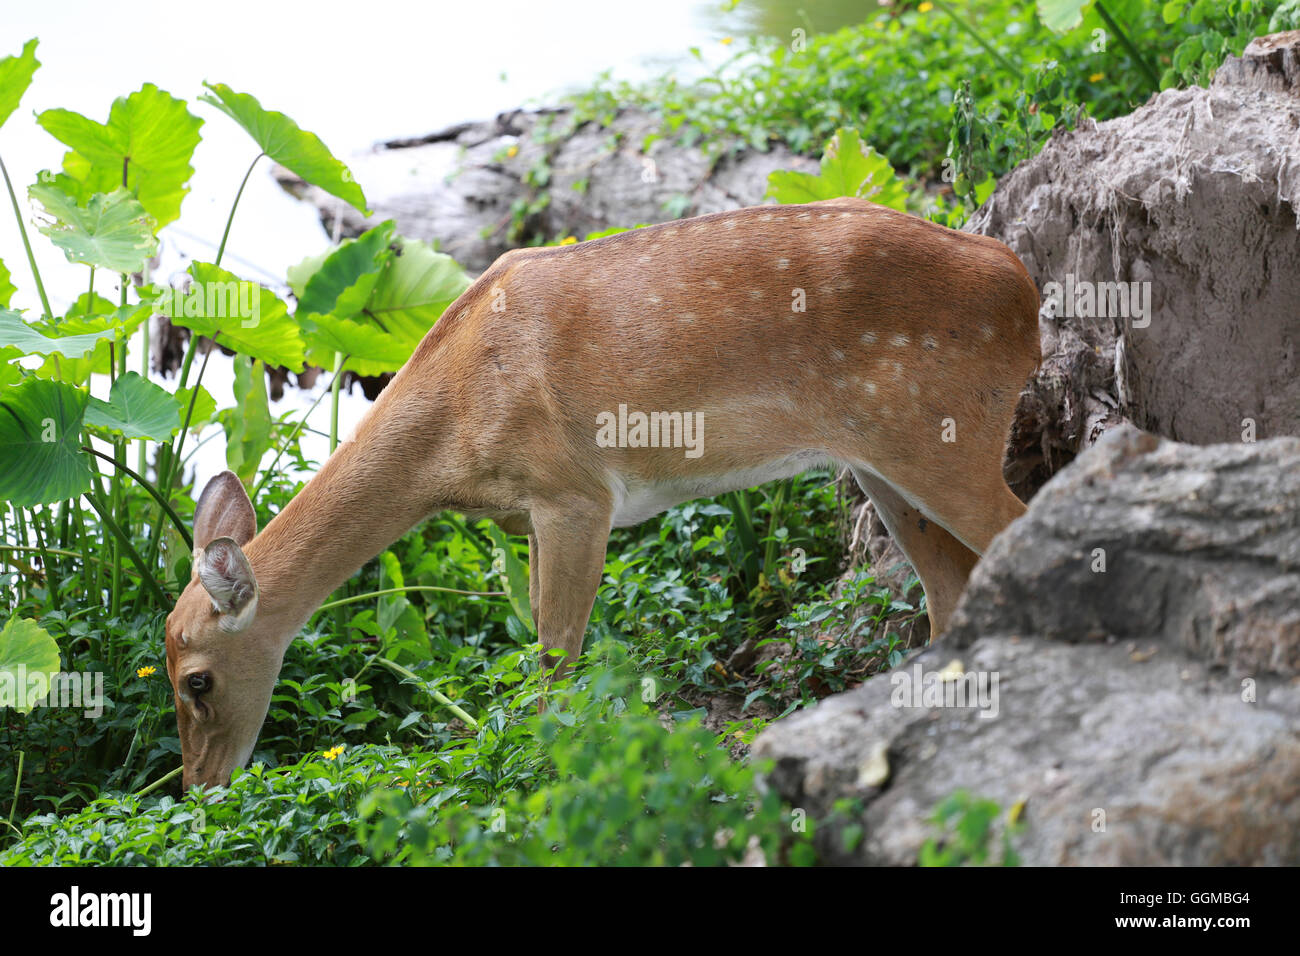 Deer or young hart animal in the forest Near the pond. Stock Photo